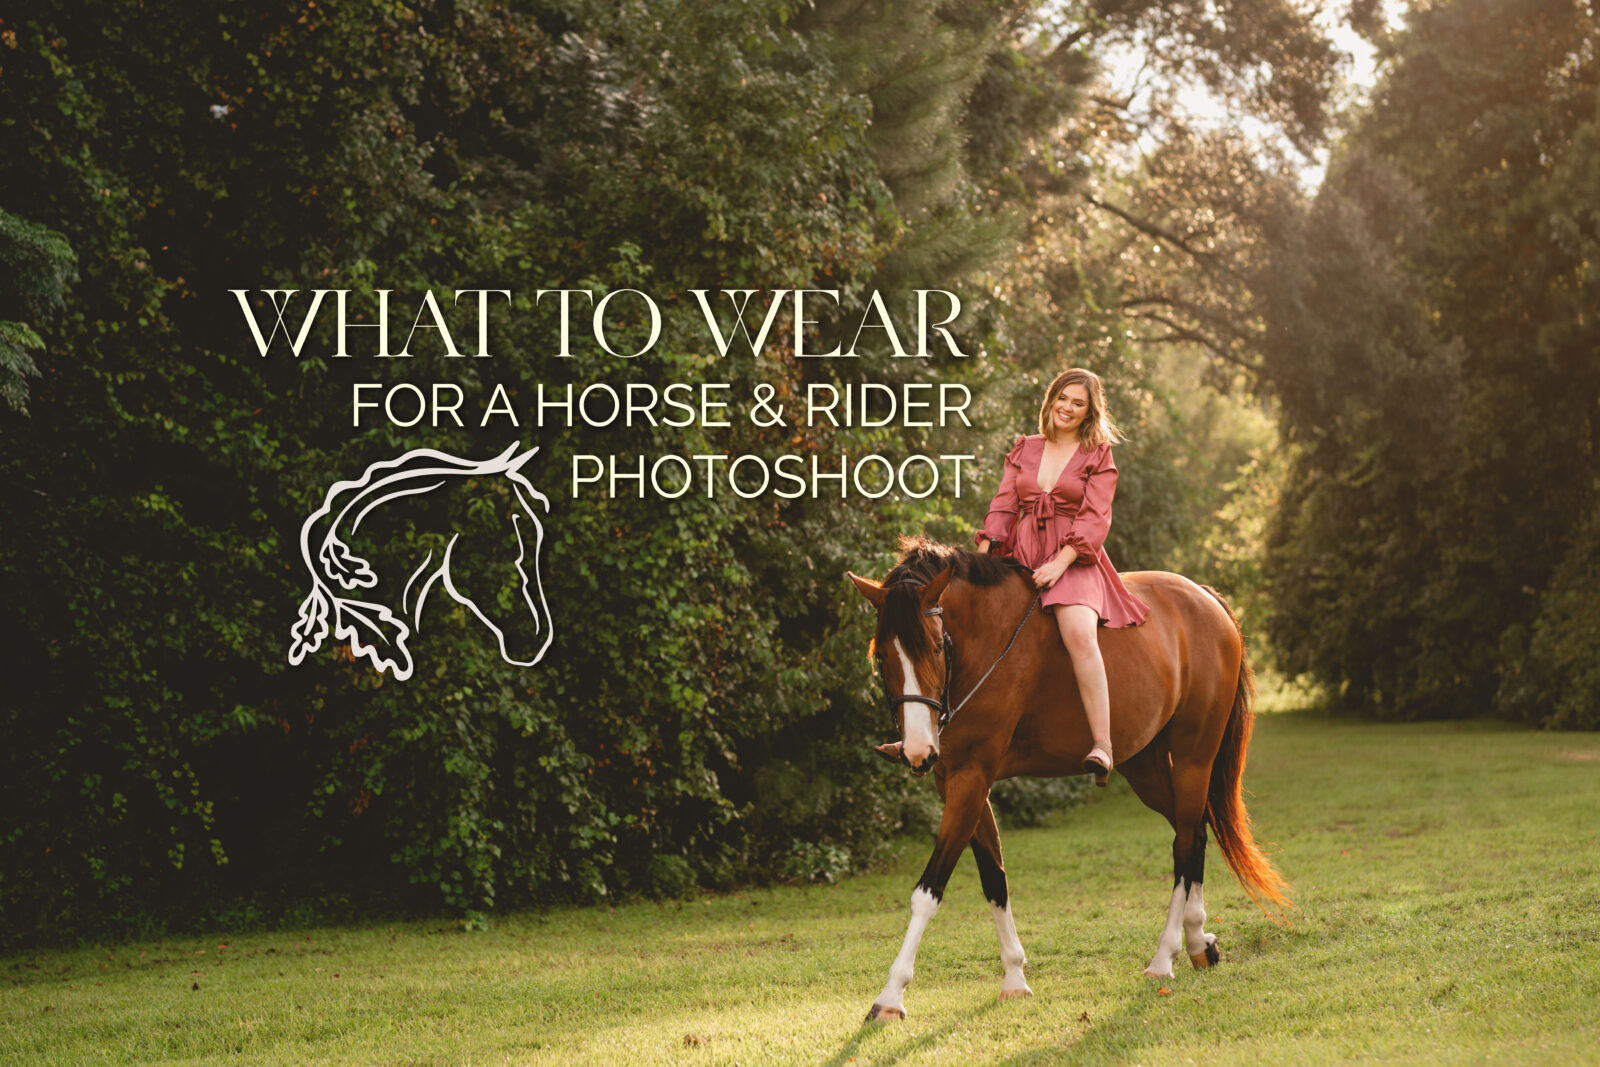 What to wear for horse and rider photoshoot. Outfit ideas for equestrians.